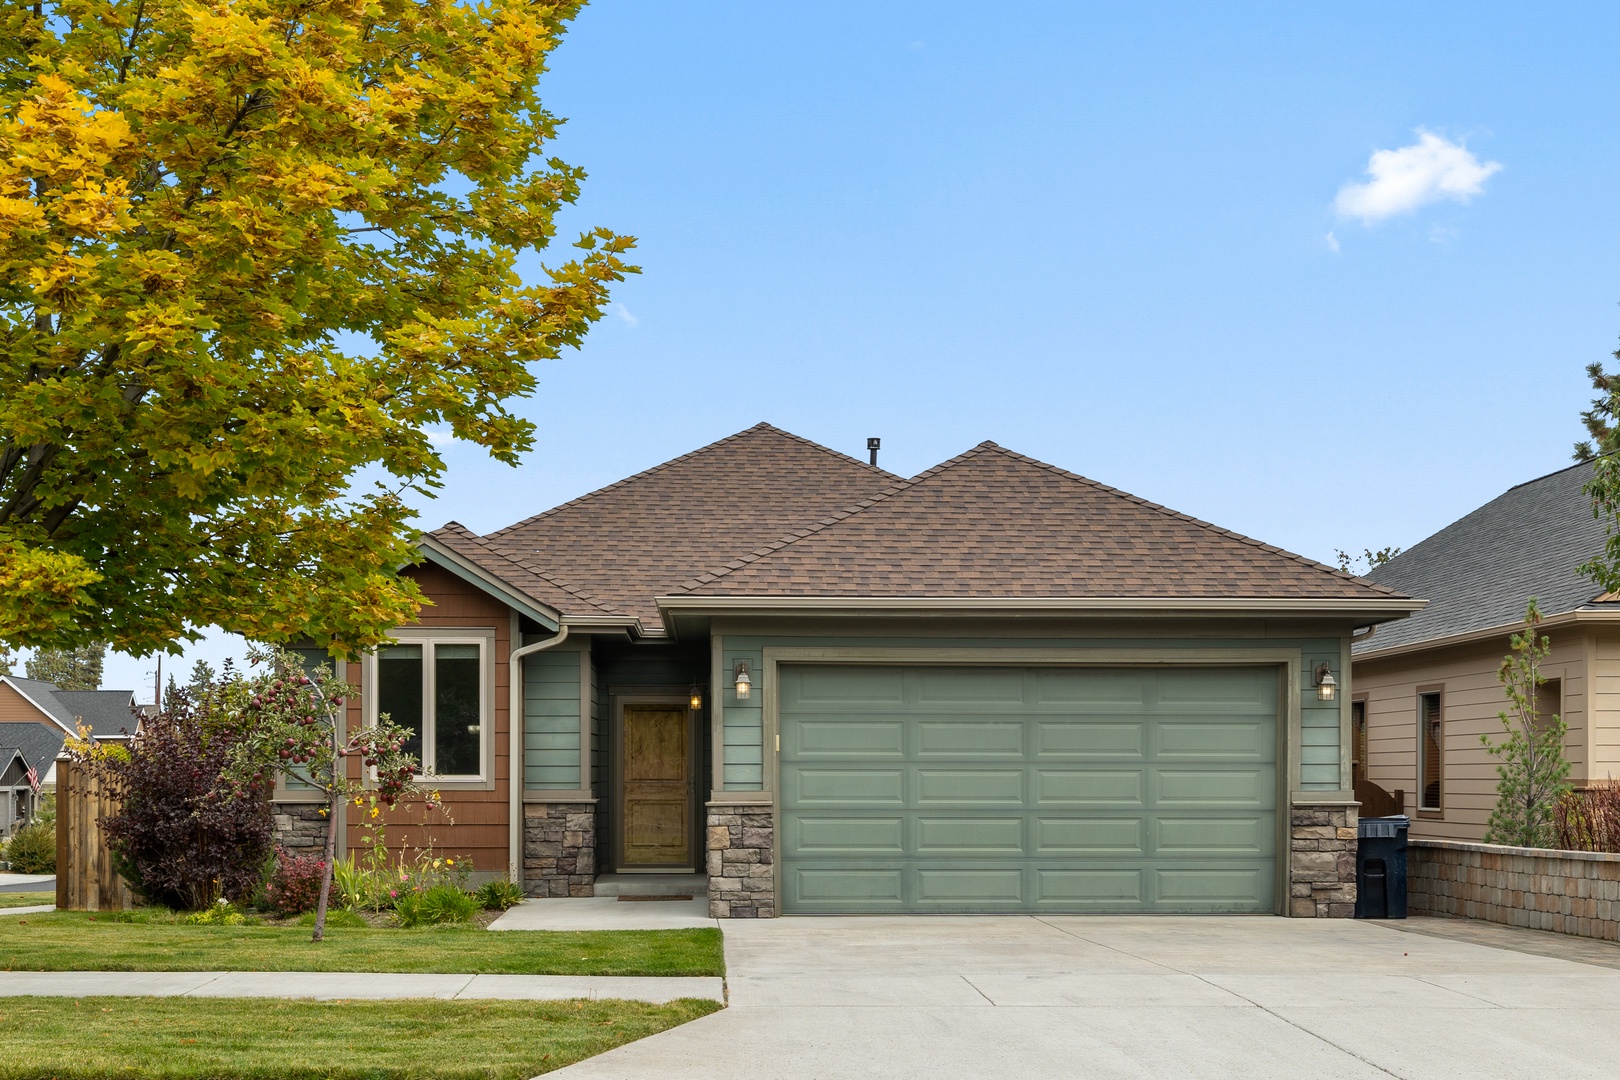 This home offers parking for up to 3 vehicles between the driveway & garage